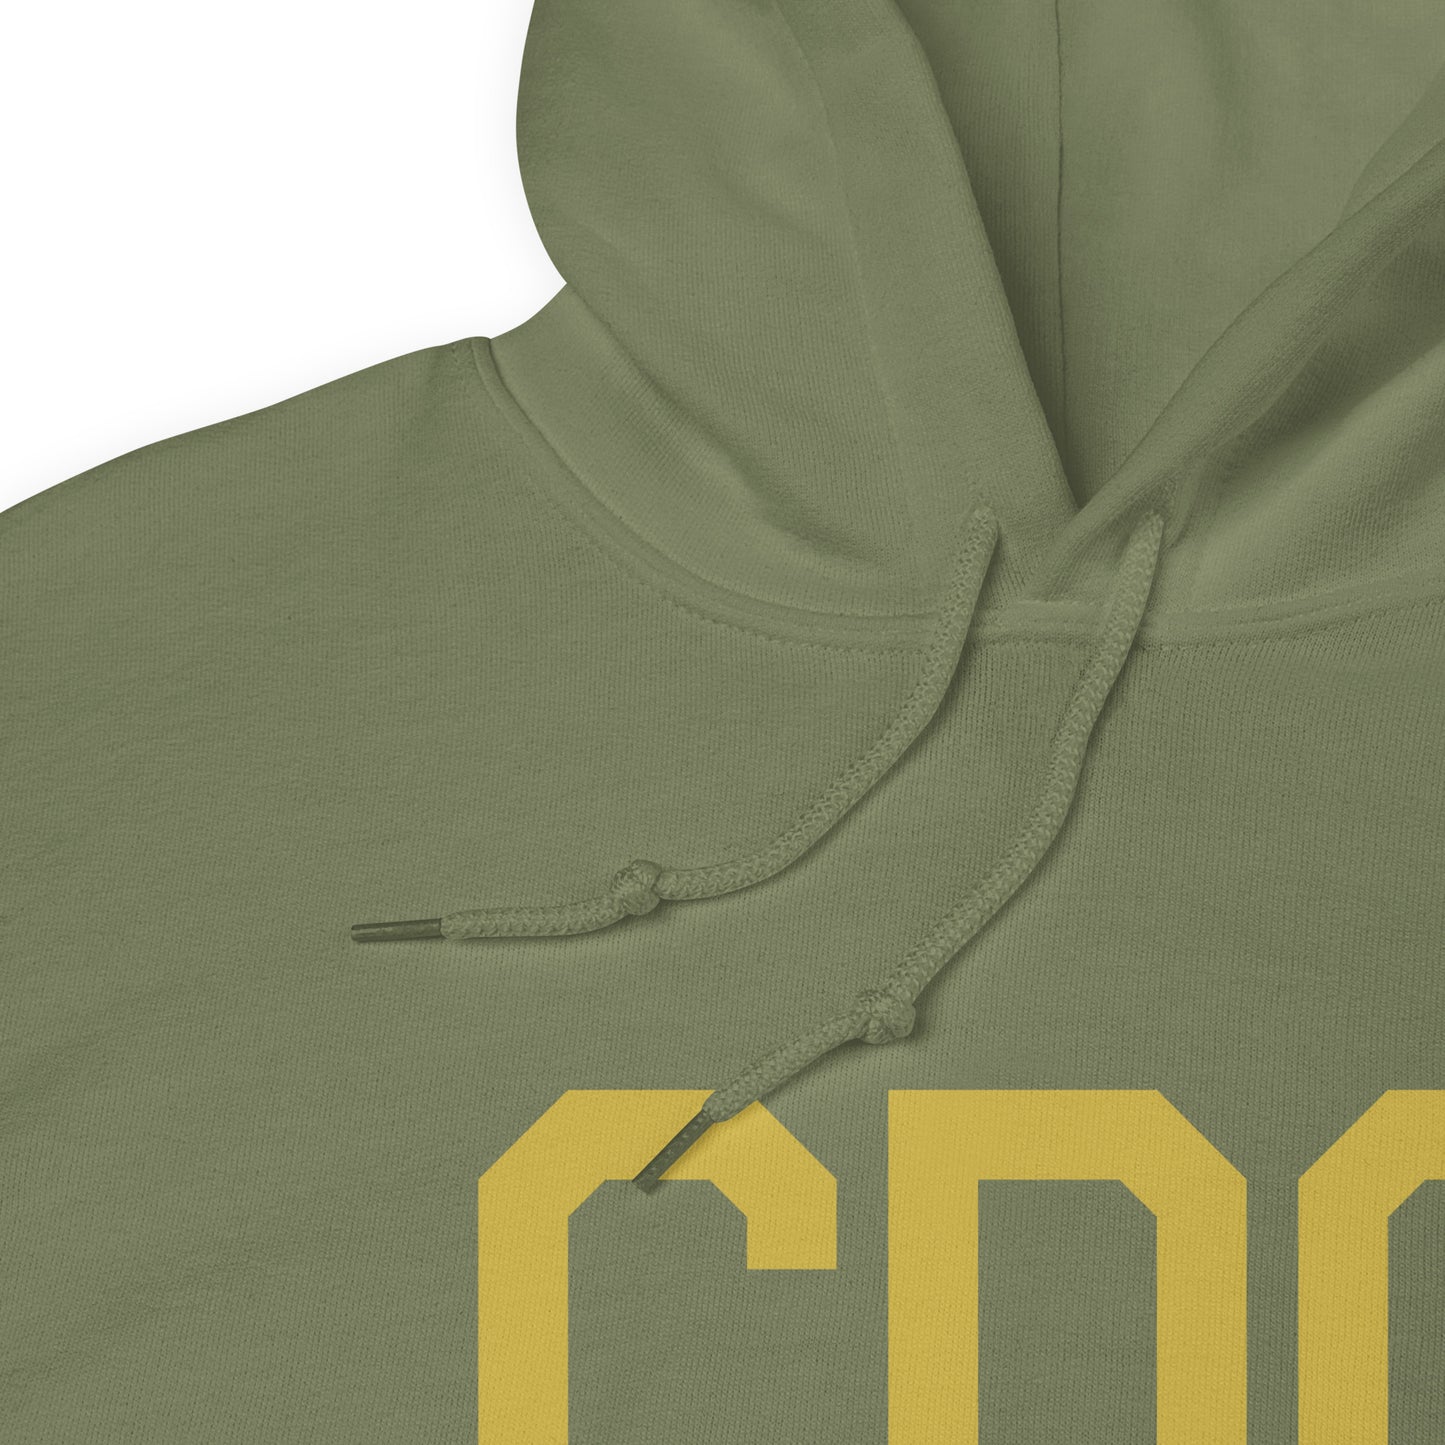 Aviation Gift Unisex Hoodie - Old Gold Graphic • CDG Paris • YHM Designs - Image 08